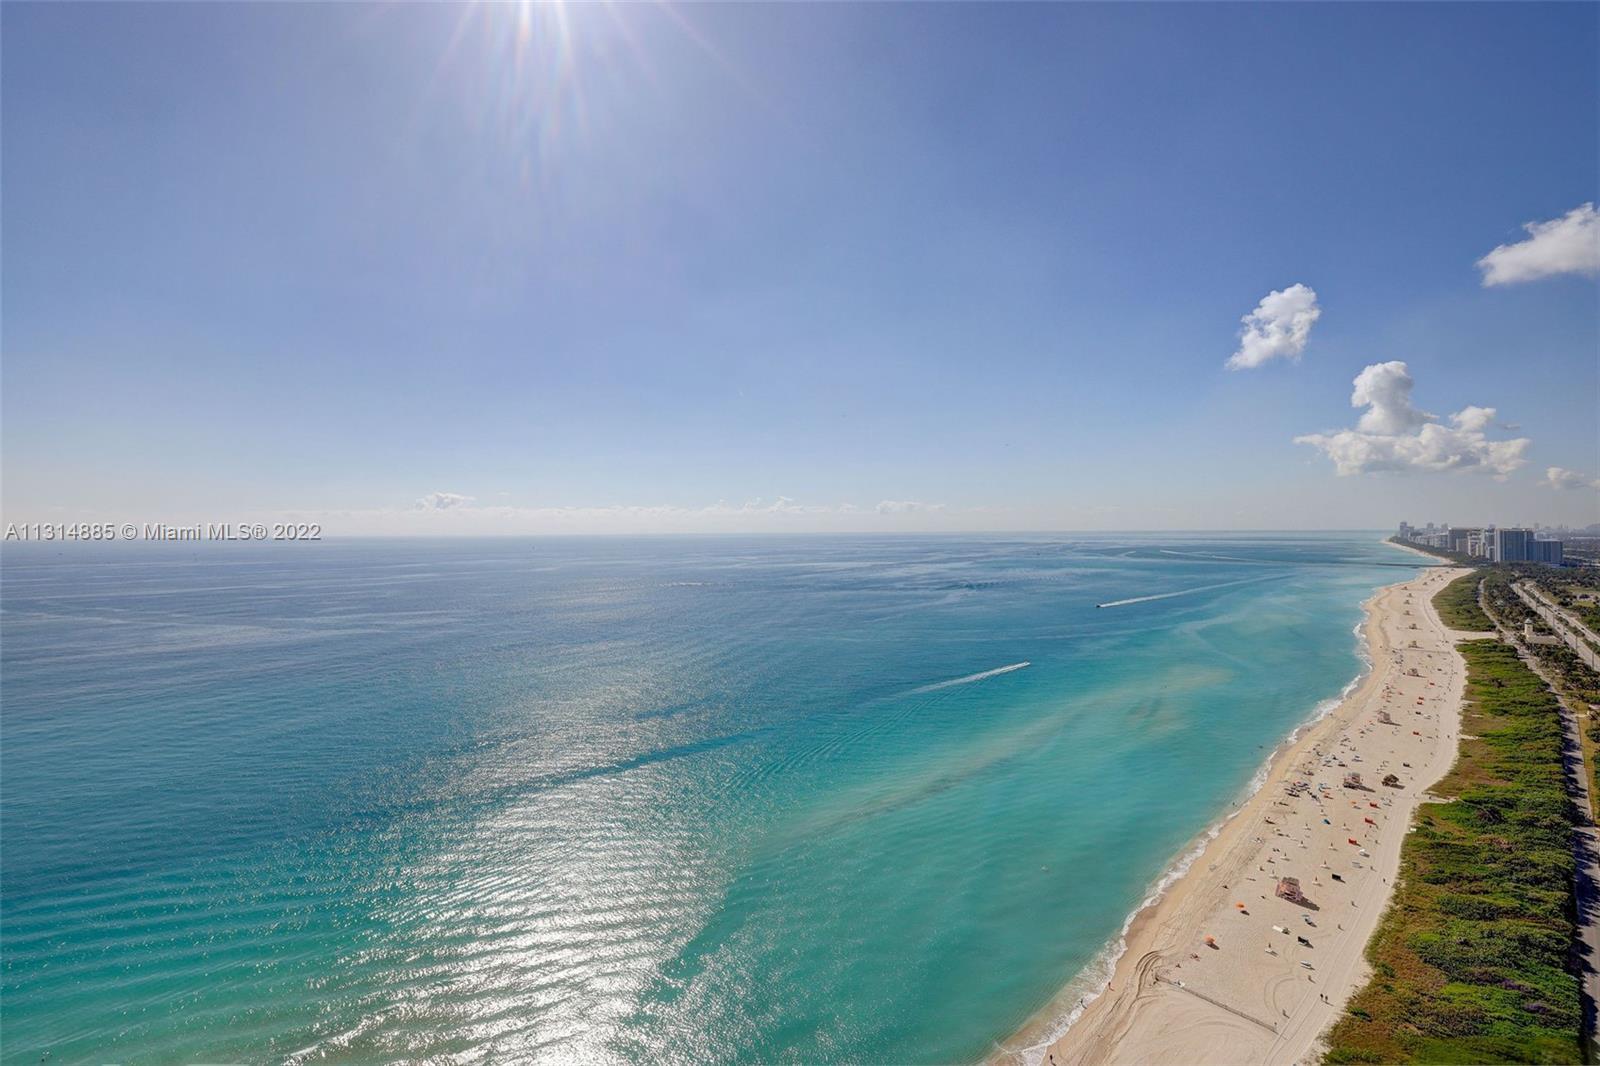 Experience Luxury Living at Ritz-Carlton Residences Sunny Isles Beach. Zip up to your residence in a